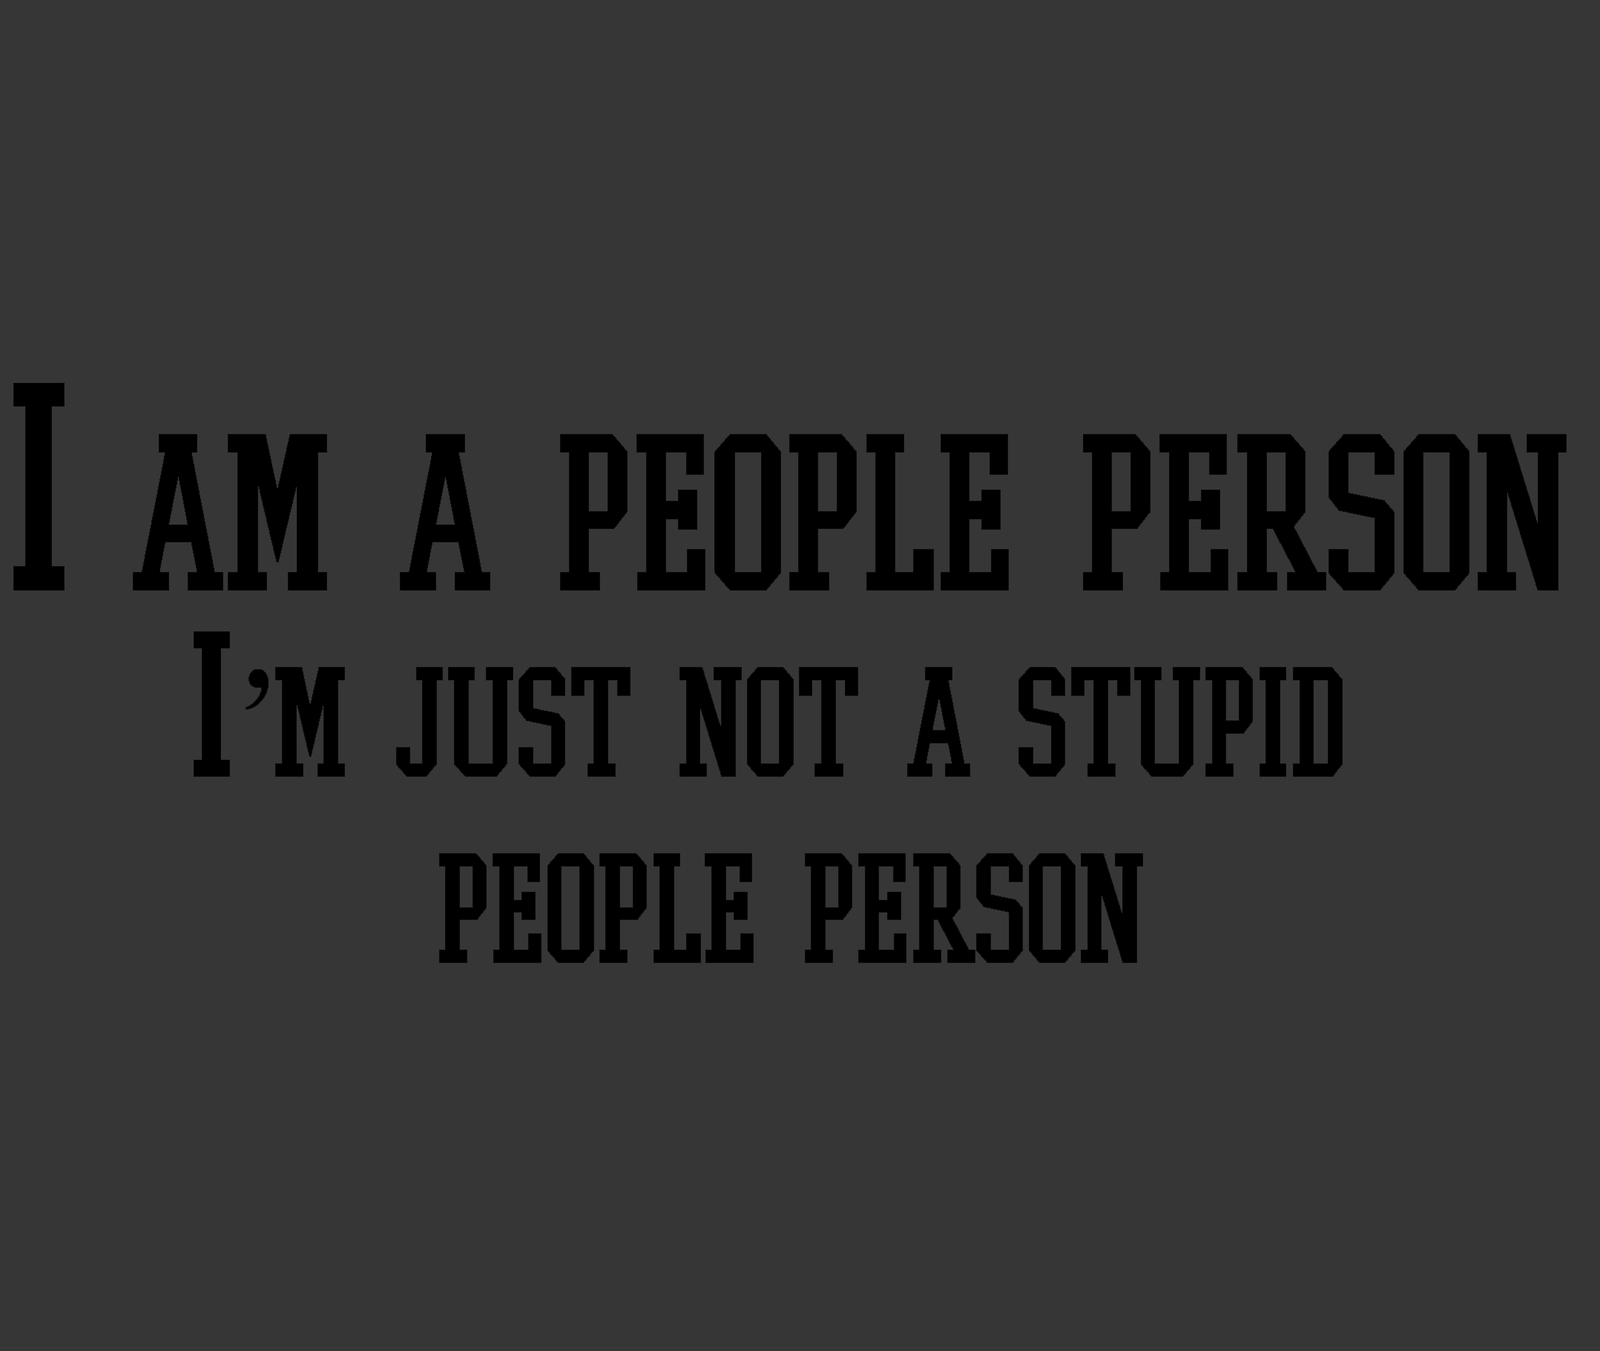 I am a people person, just not a stupid and 36 similar items